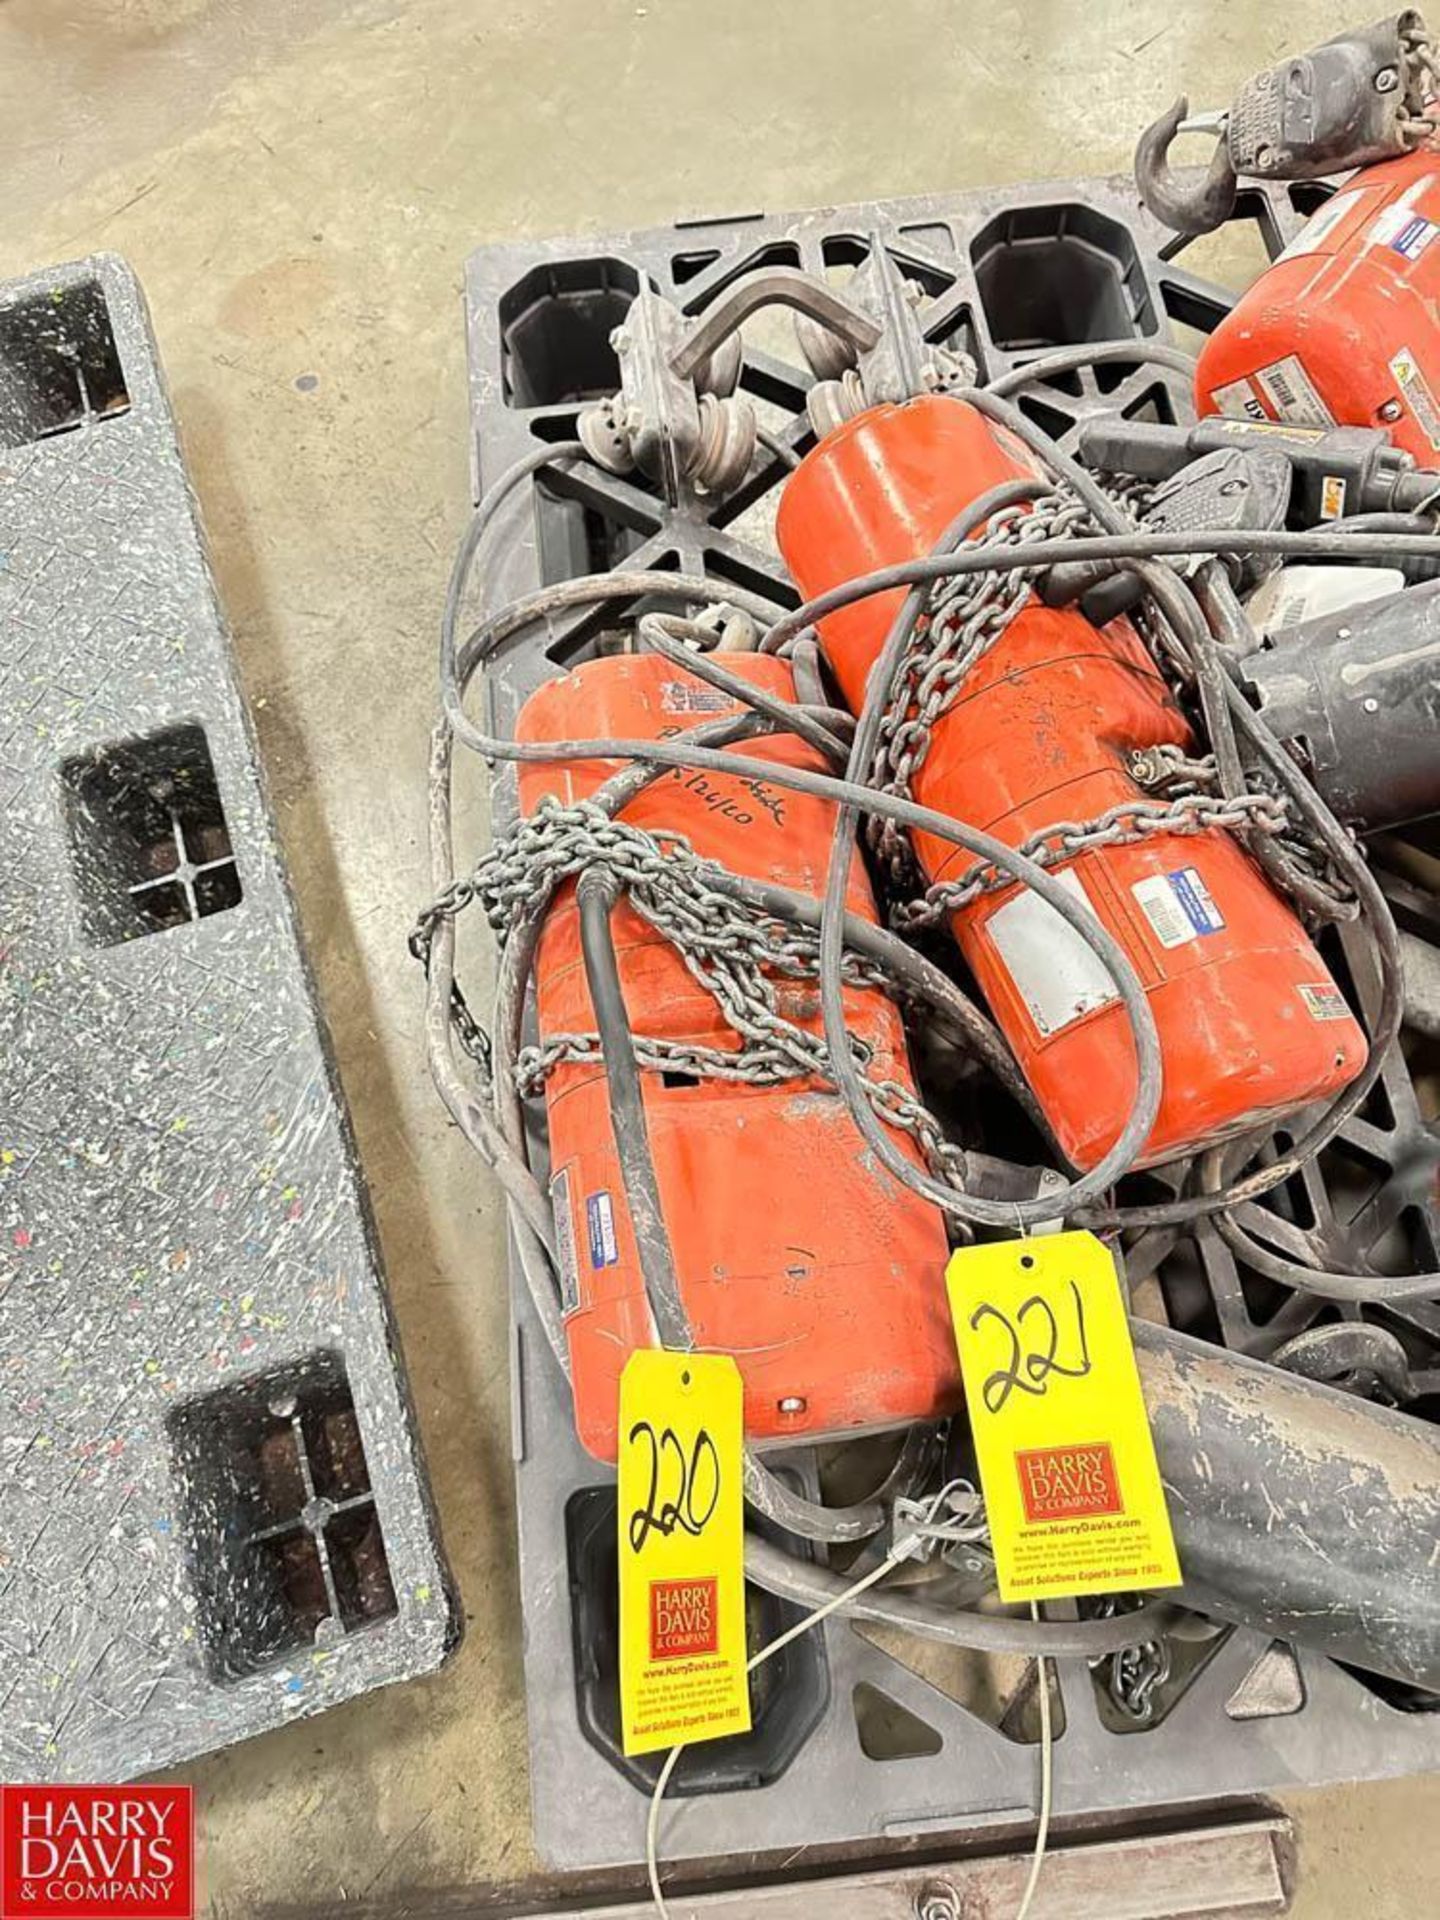 CM 1 Ton Electric Chain Hoist - Rigging Fee: $35 - Image 2 of 2